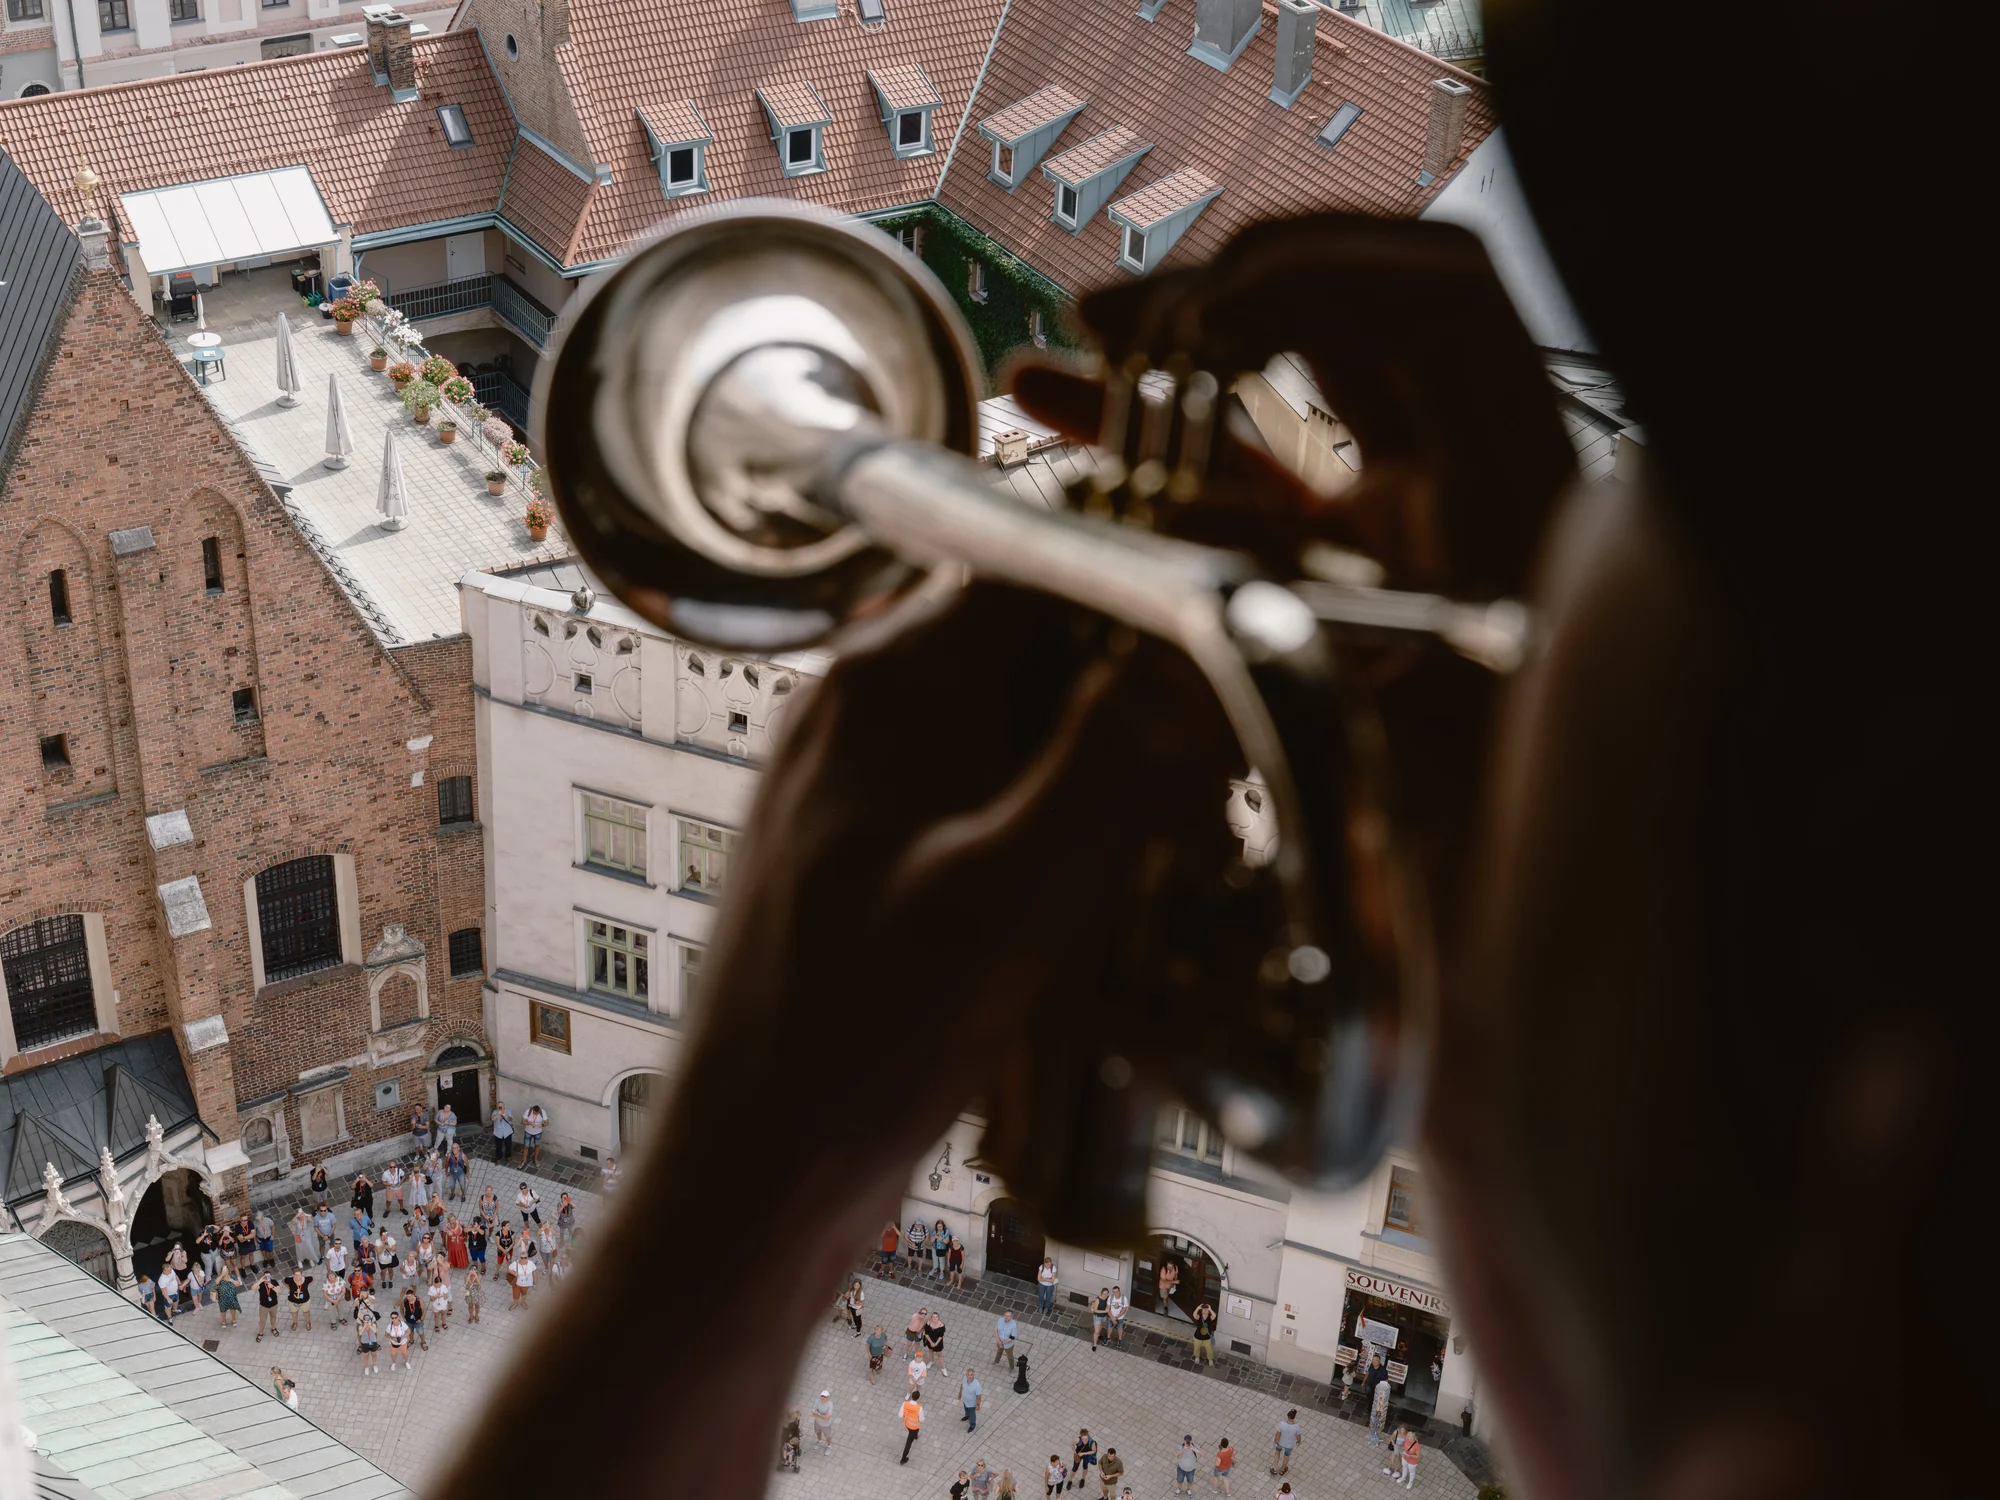 Photo of a man playing trumpet call at the tower of St Mary's Church.